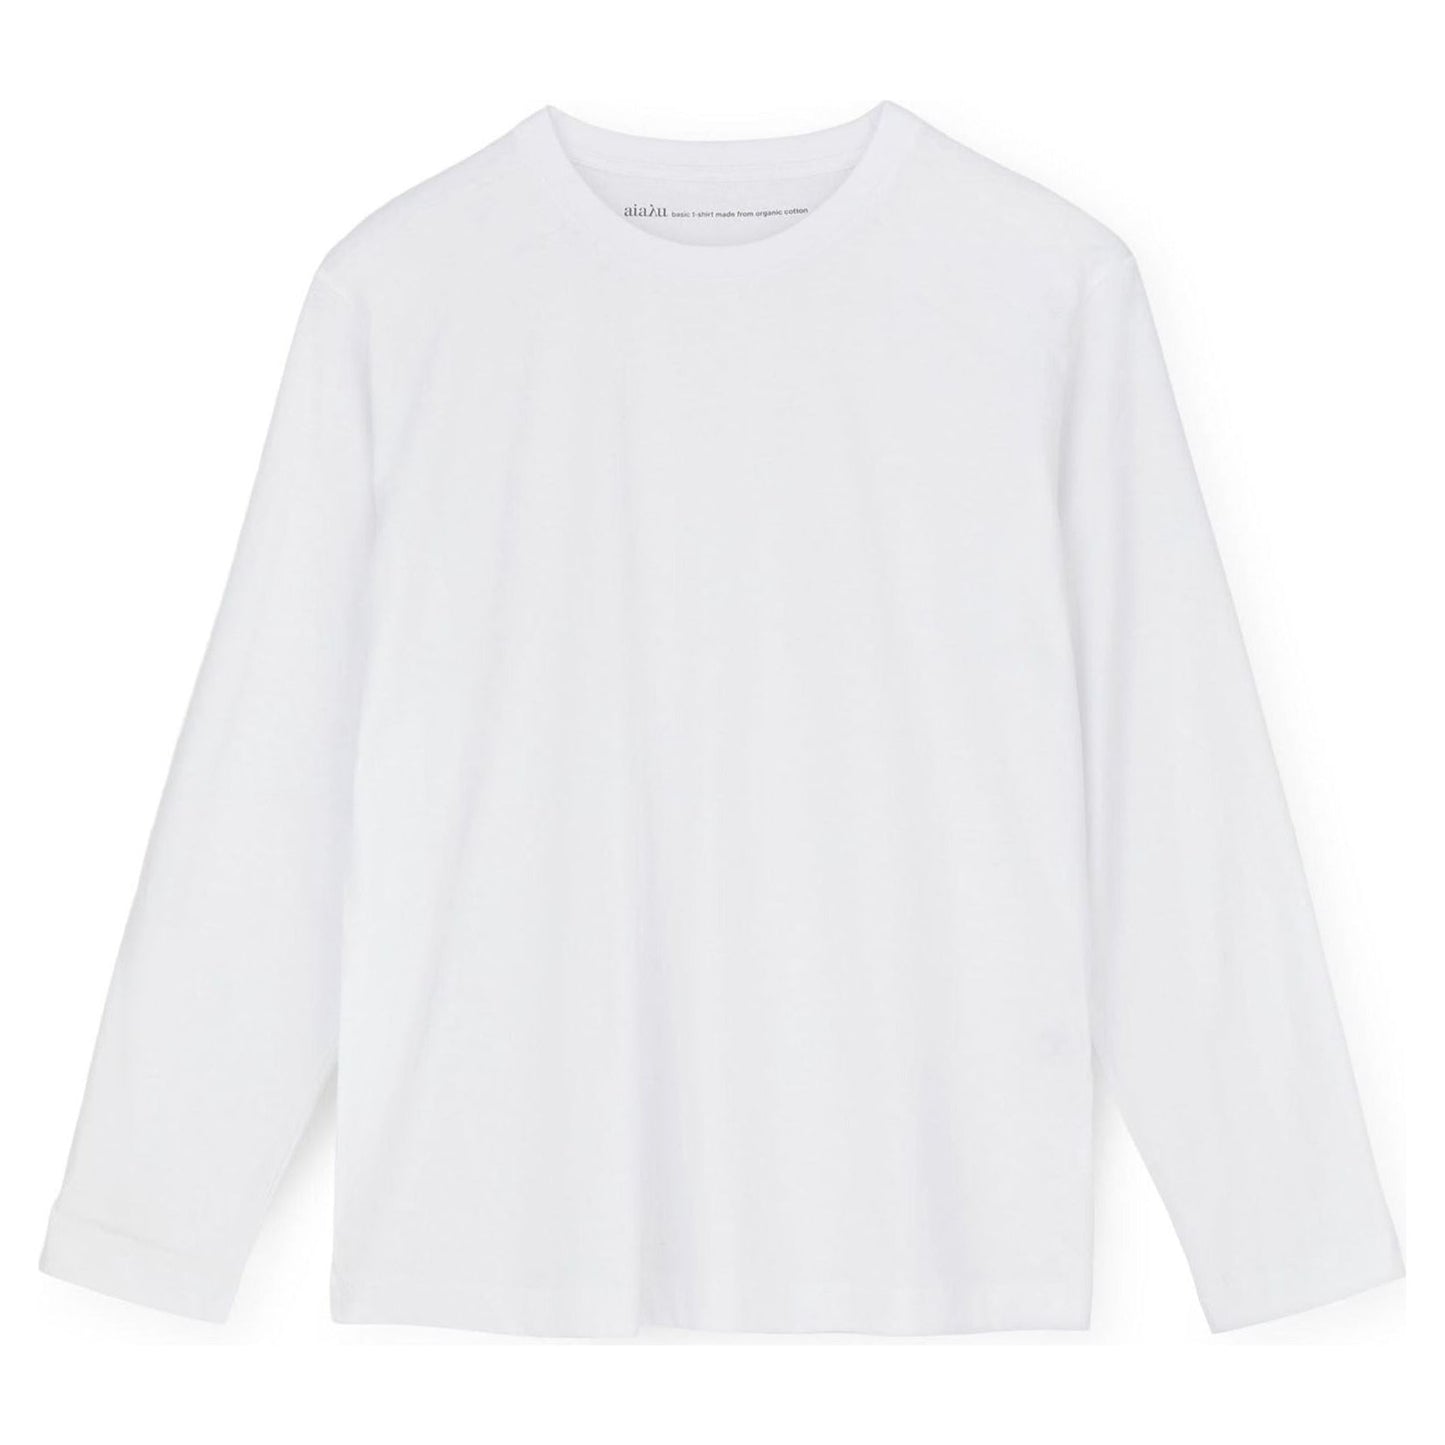 Aiayu W L/S Tshirt LS Two Pack, White & Undyed